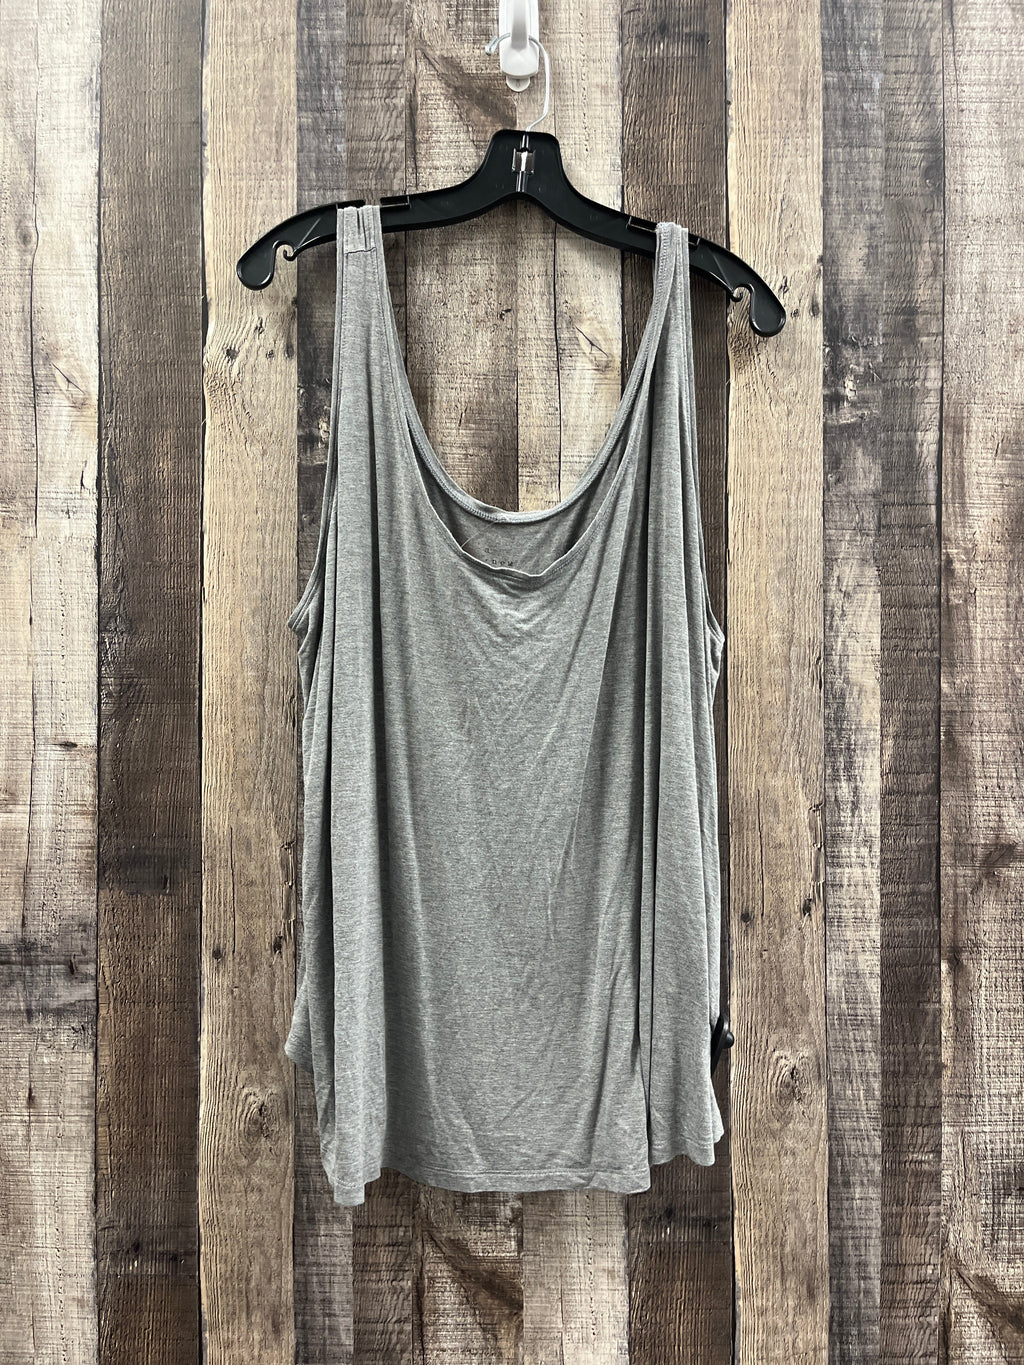 Wild Fable Tank Top, Size XL - $16 - From Melissa